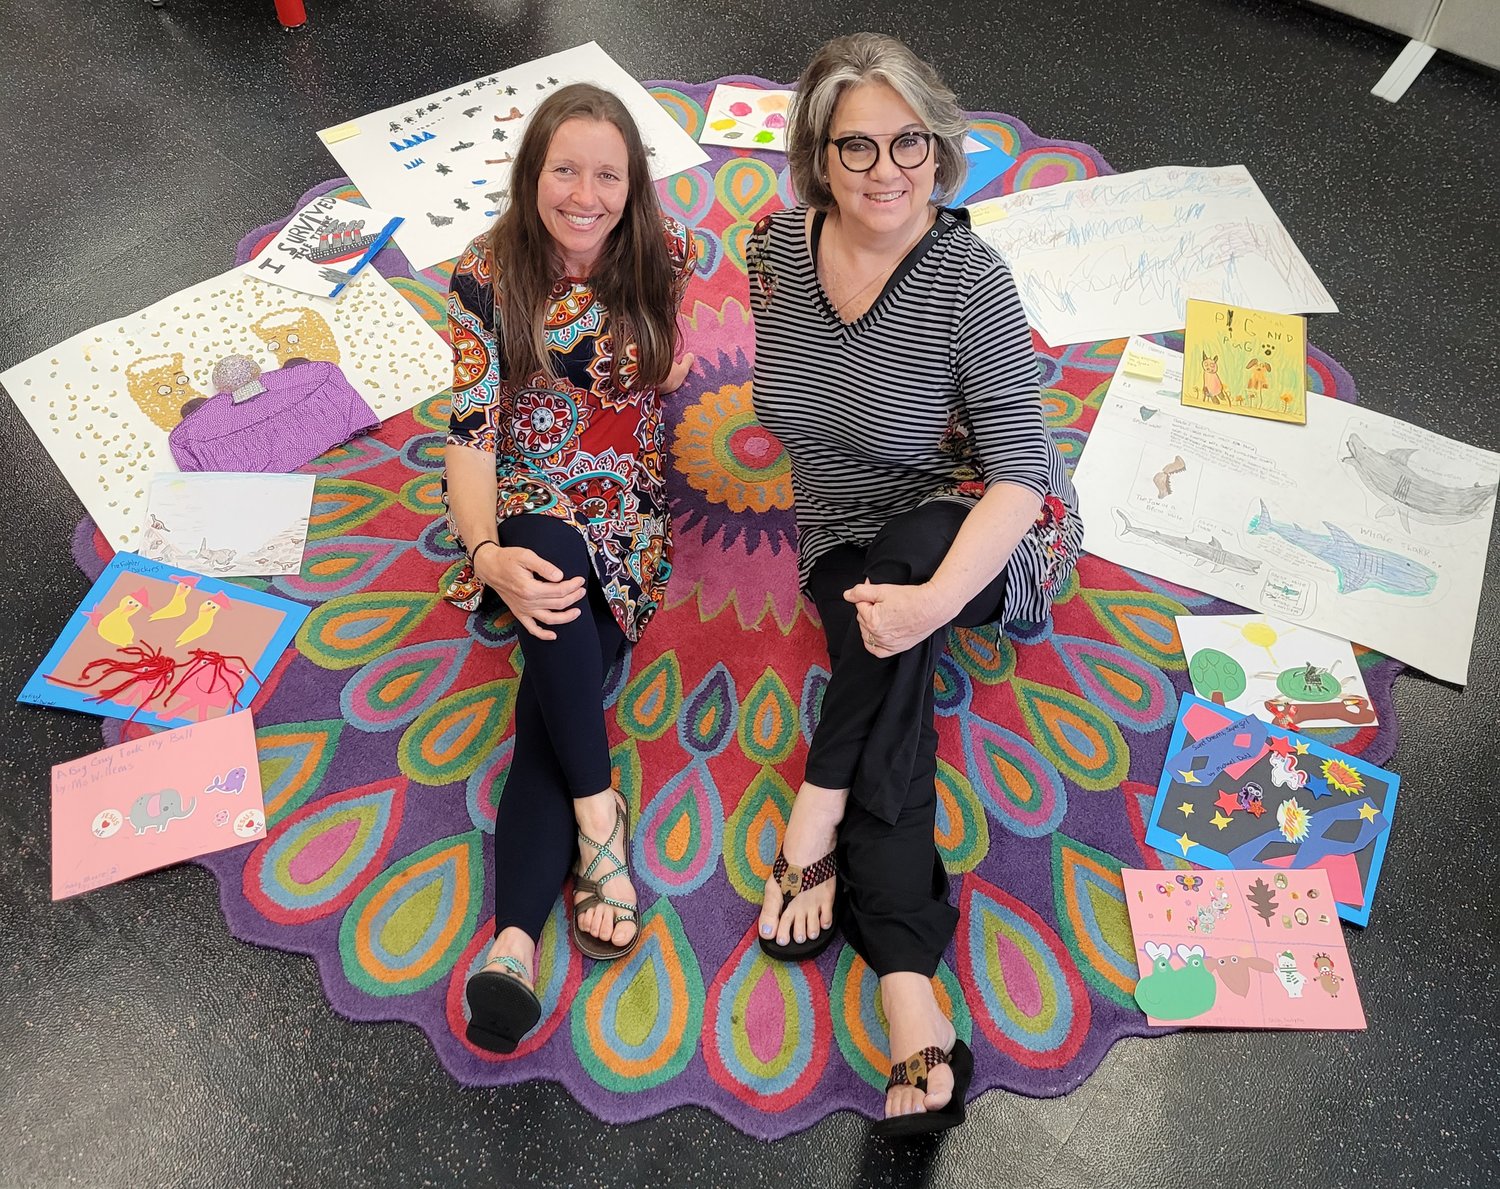 Anna Hallex and Kelley Wansley, of the Children's Department at the Library, surrounded by April's "Read A Book" project entries.